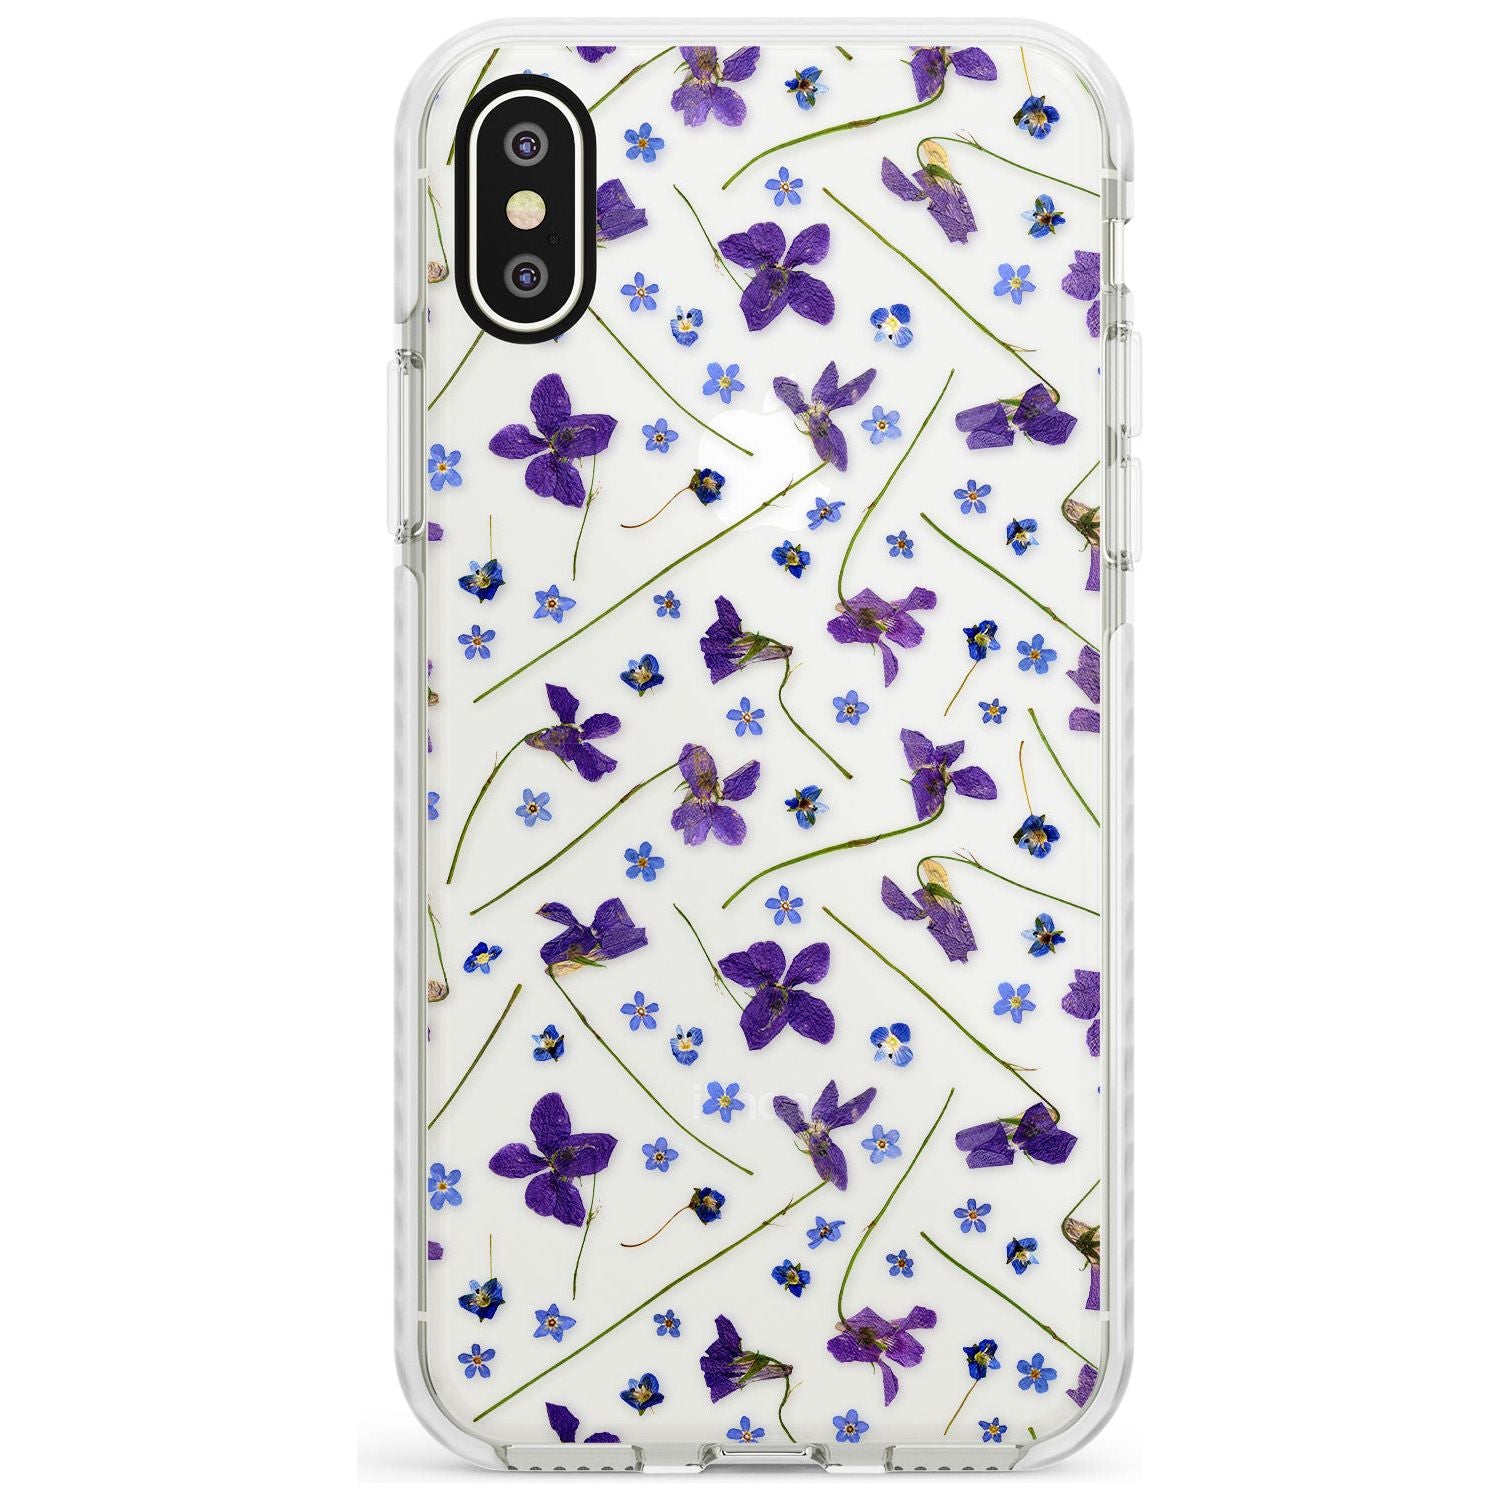 Violet & Blue Floral Pattern Design Impact Phone Case for iPhone X XS Max XR